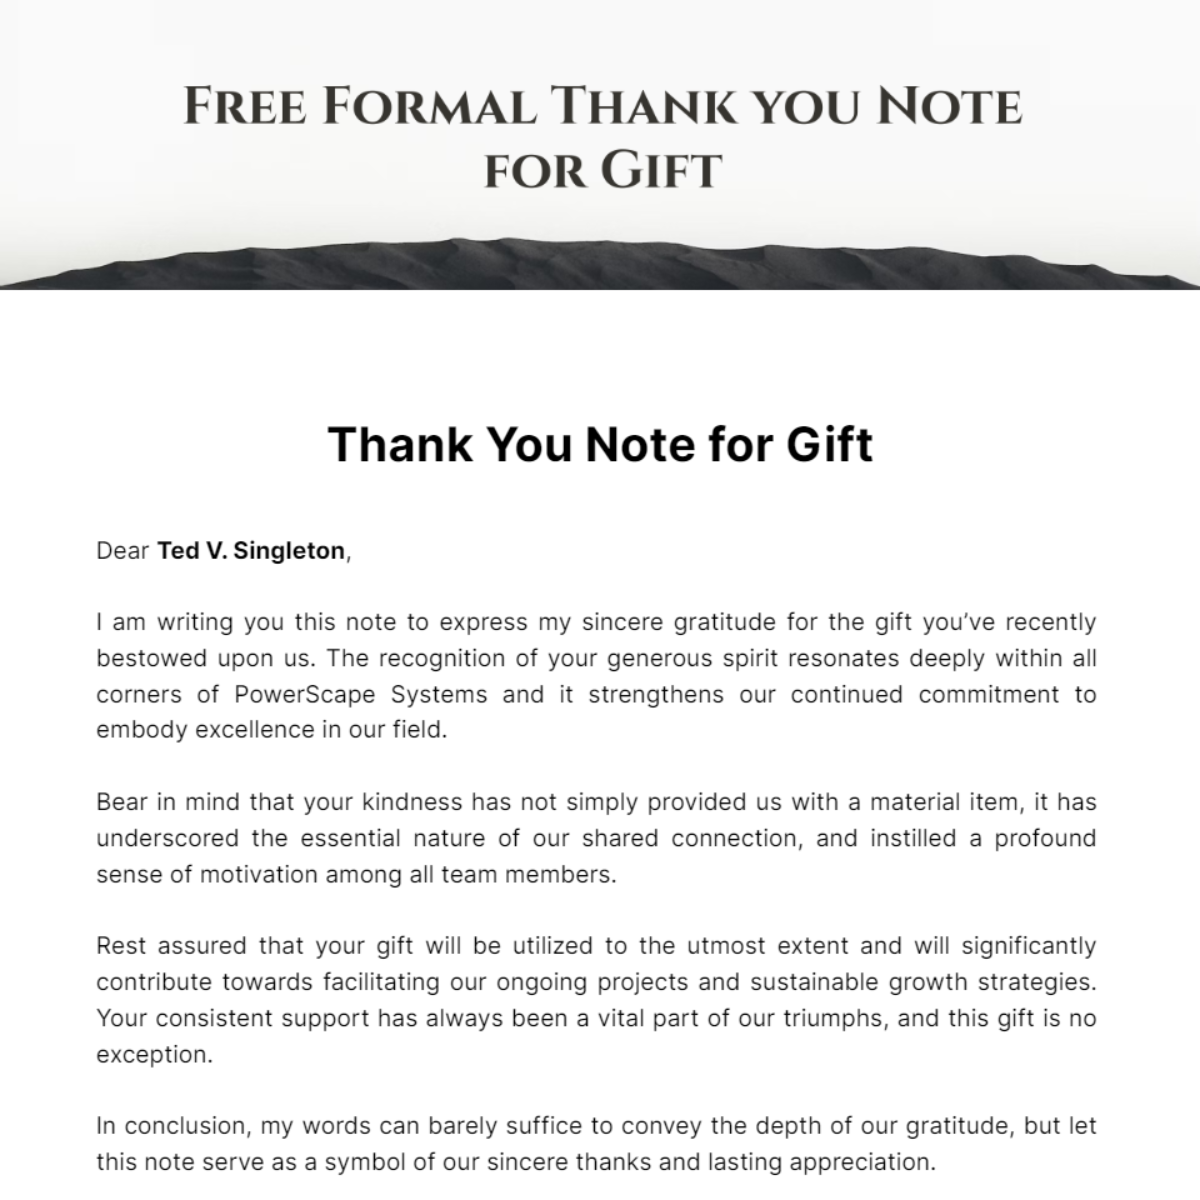 Formal Thank you Note for Gift Template